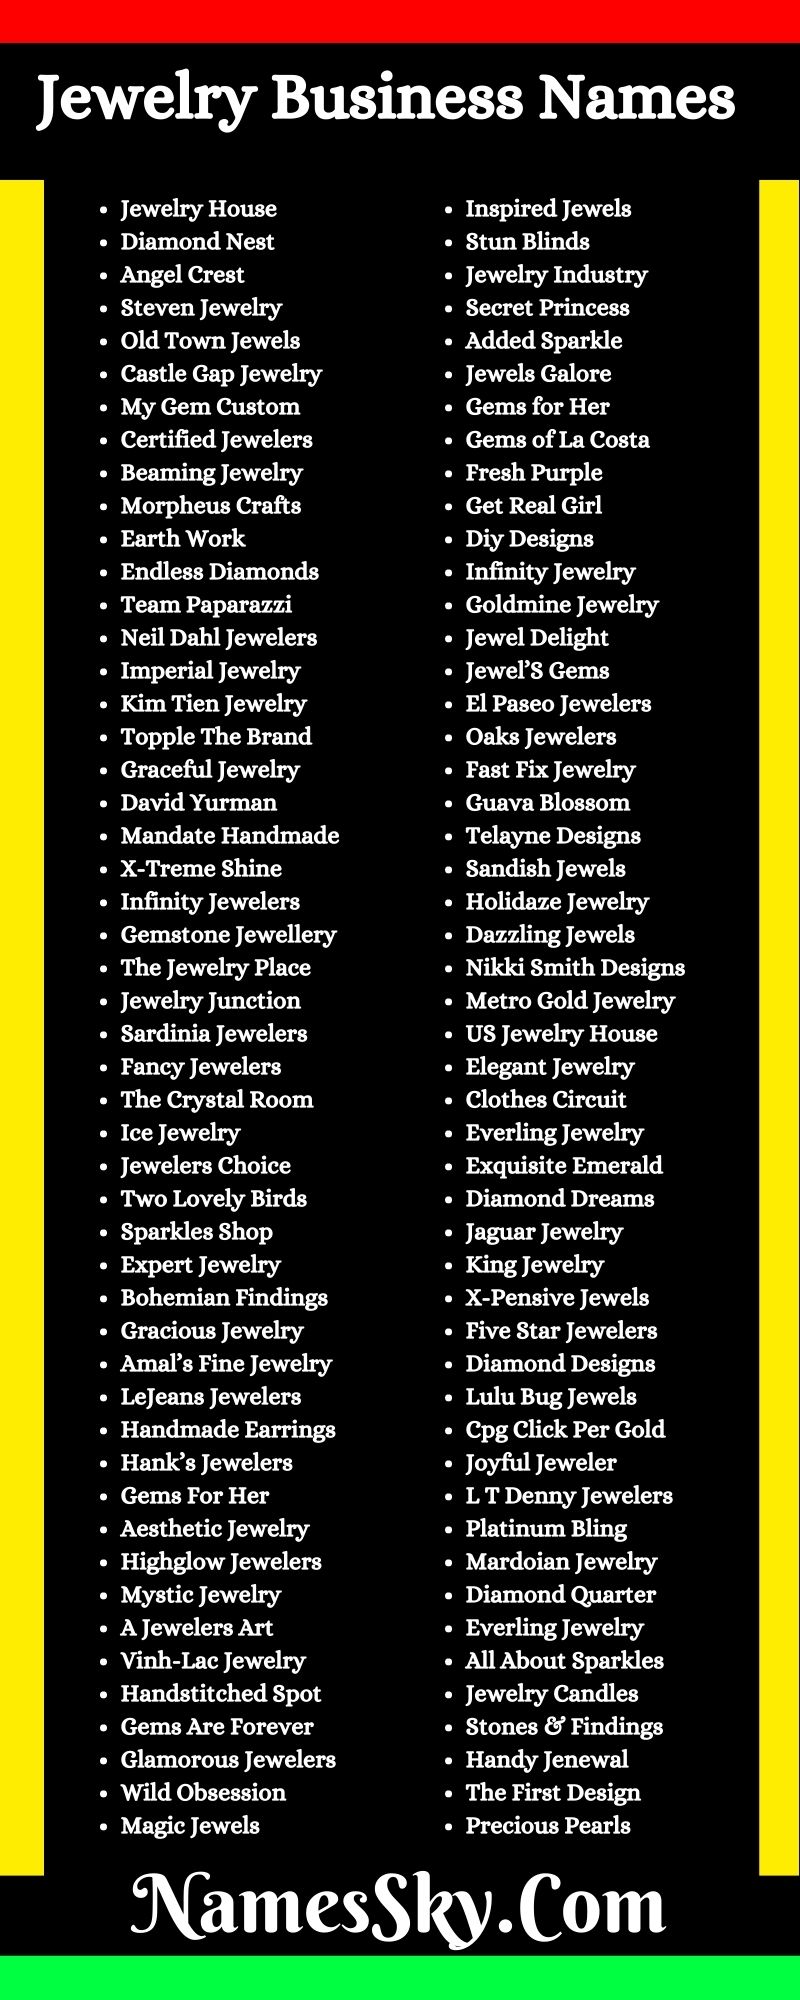 Jewelry Business Names